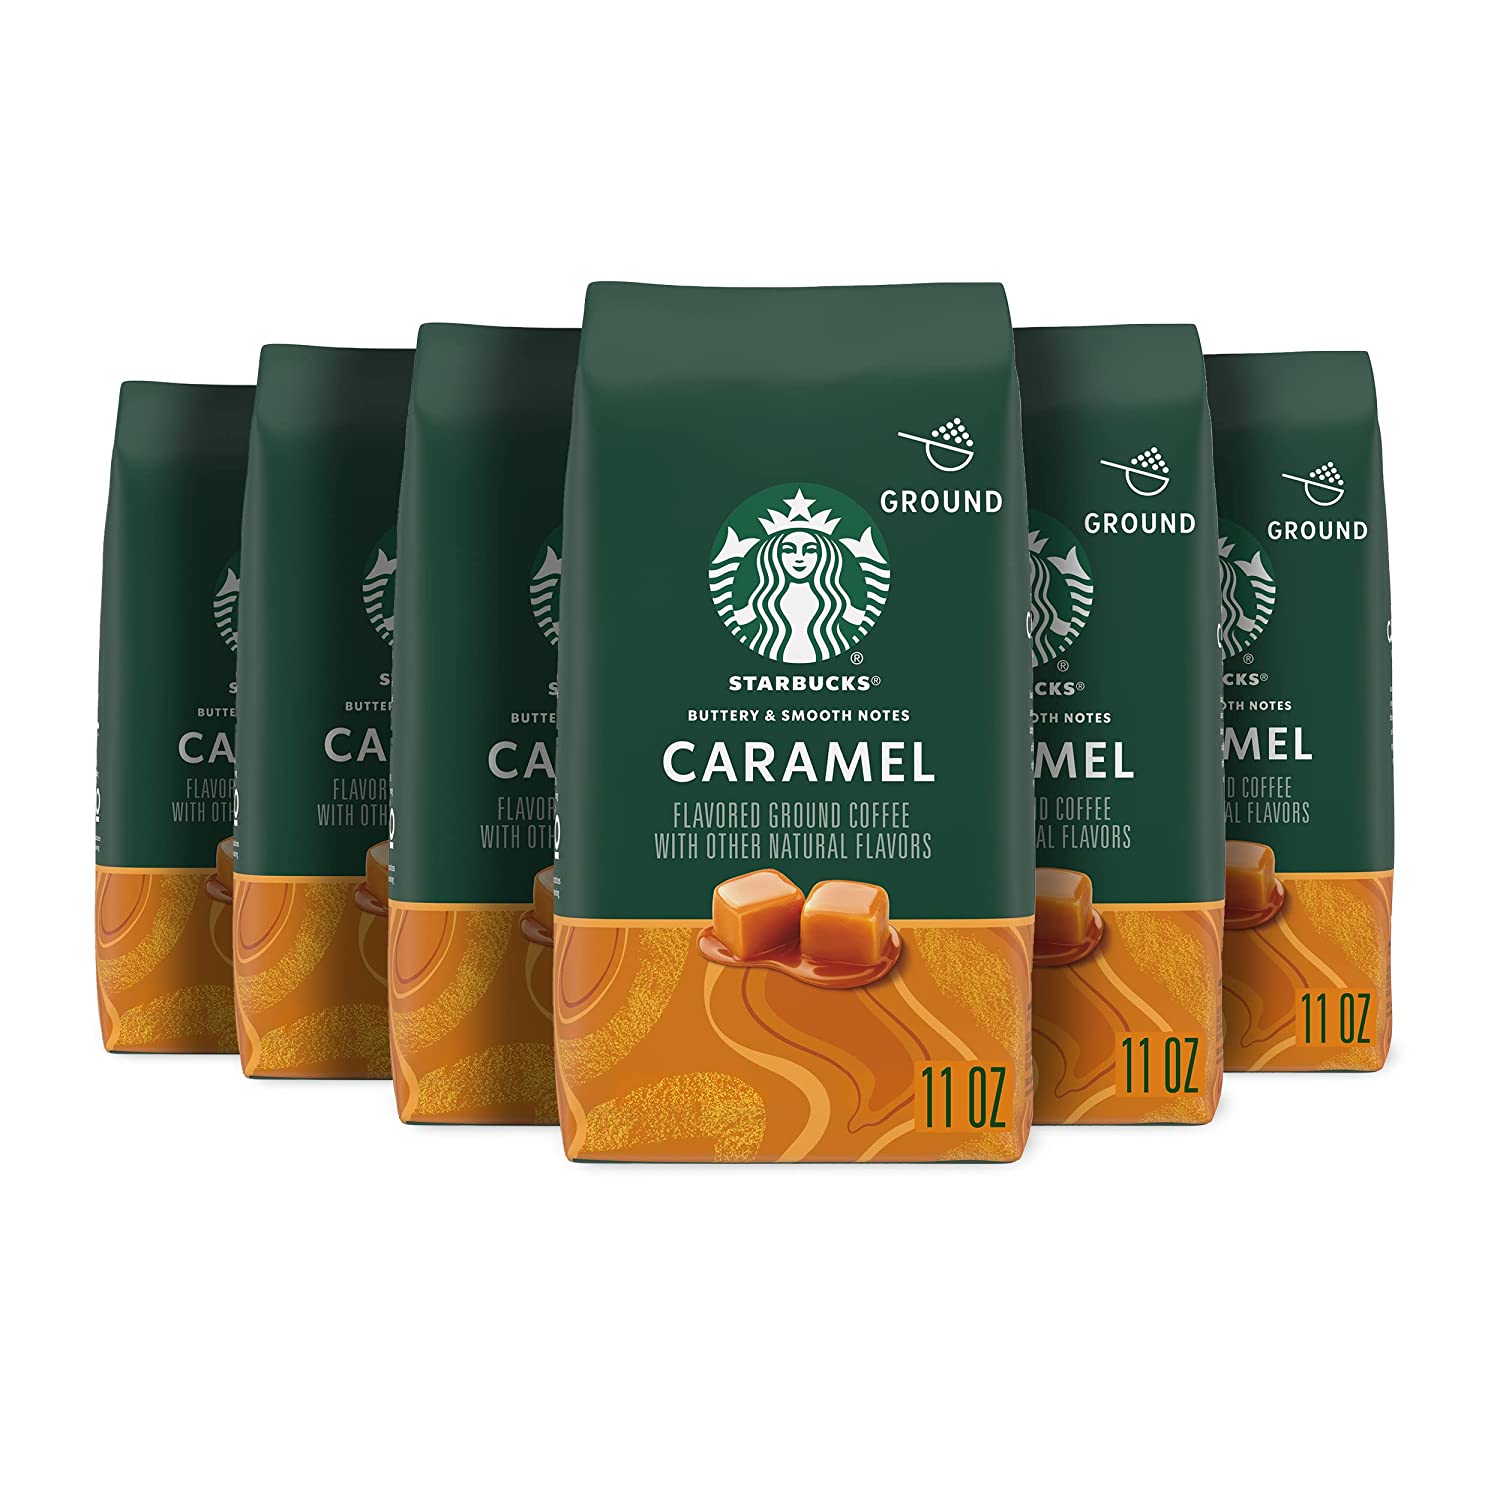 Starbucks Ground Coffee, Caramel Flavored Coffee, No Artificial Flavors, 10...